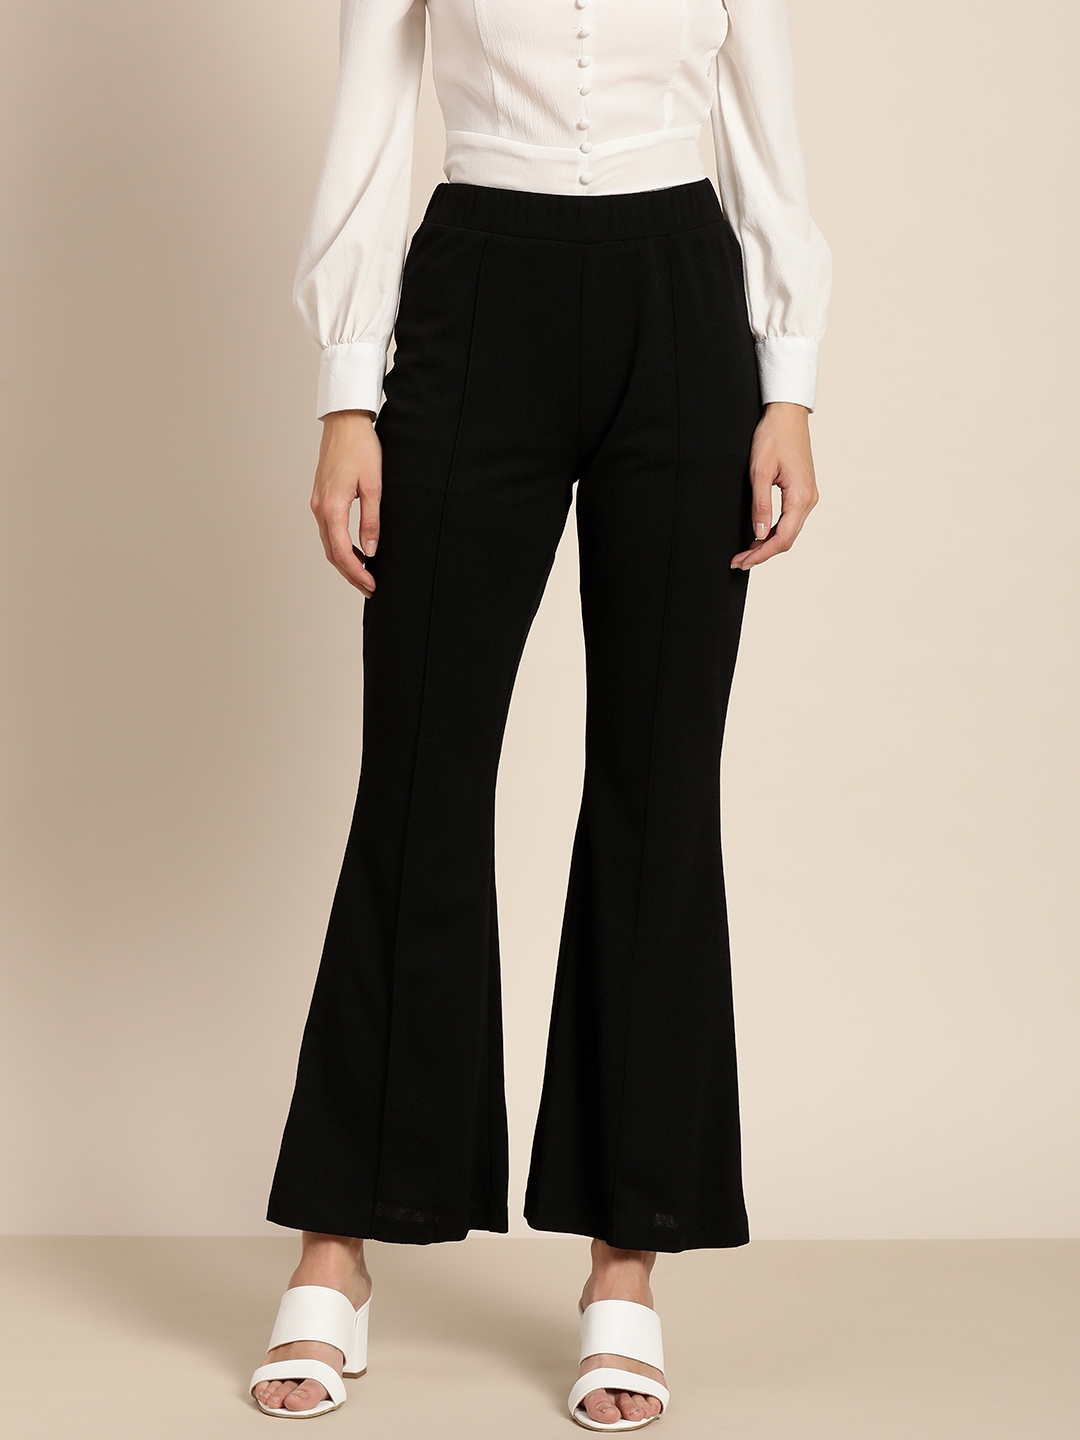 Marie Claire Women Black Solid Flared Pleated Bootcut Trousers